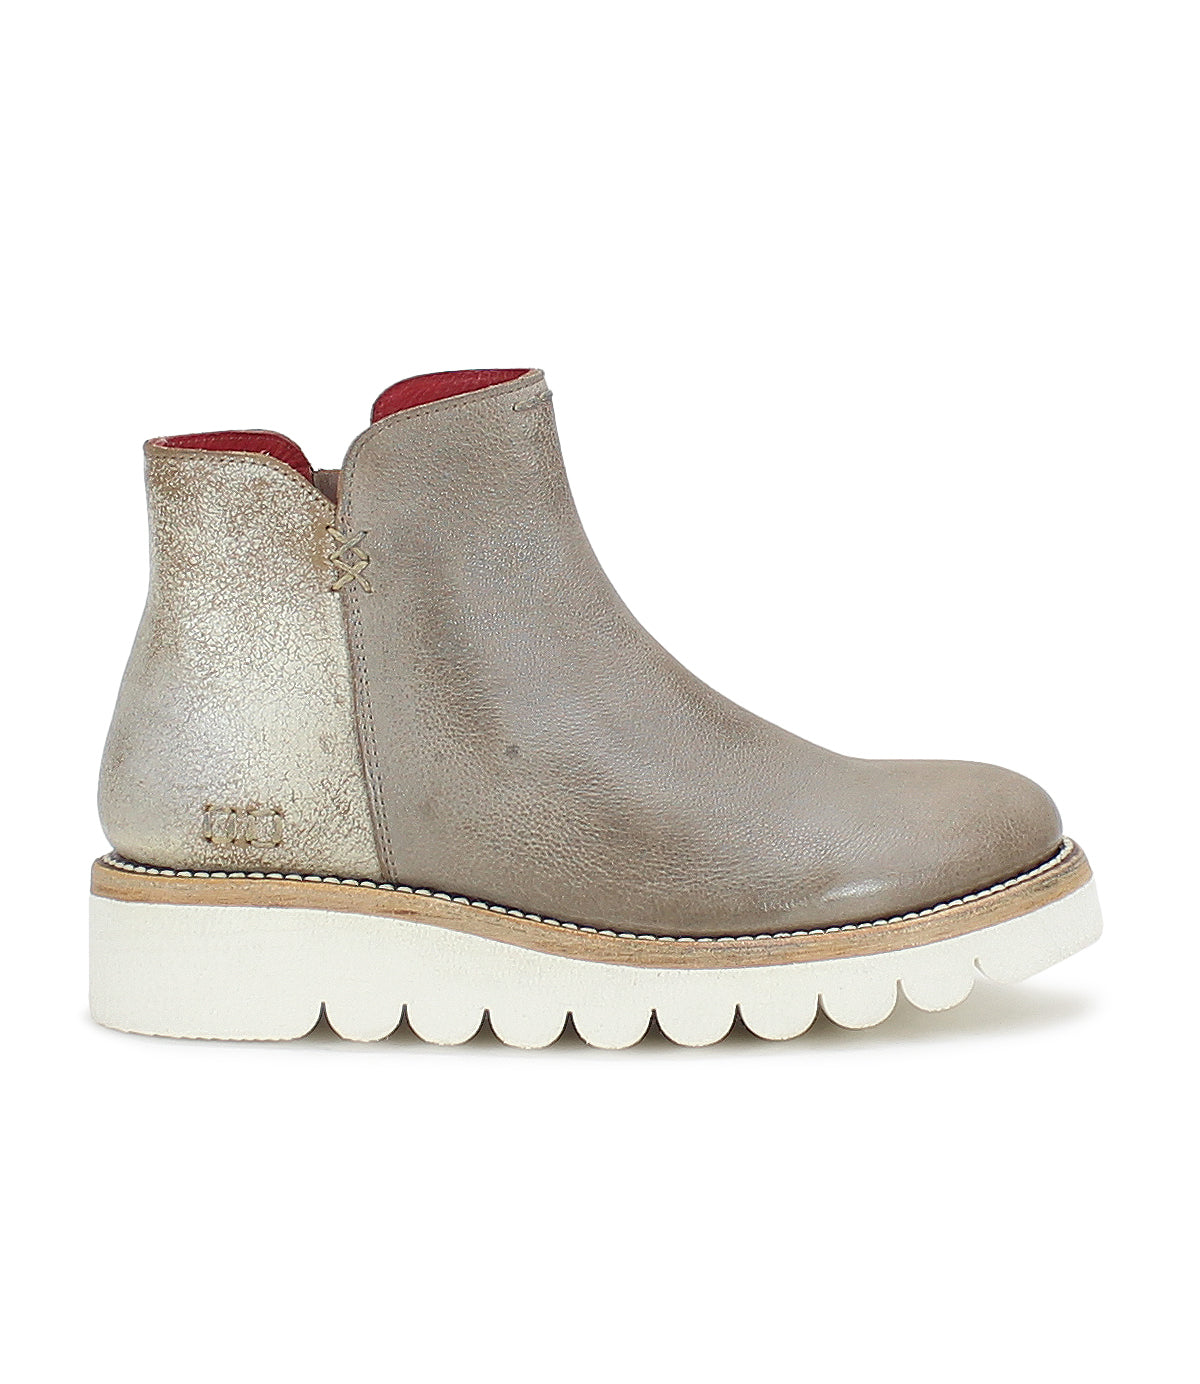 A versatile women's Lydyi ankle boot with a red sole by Bed Stu.